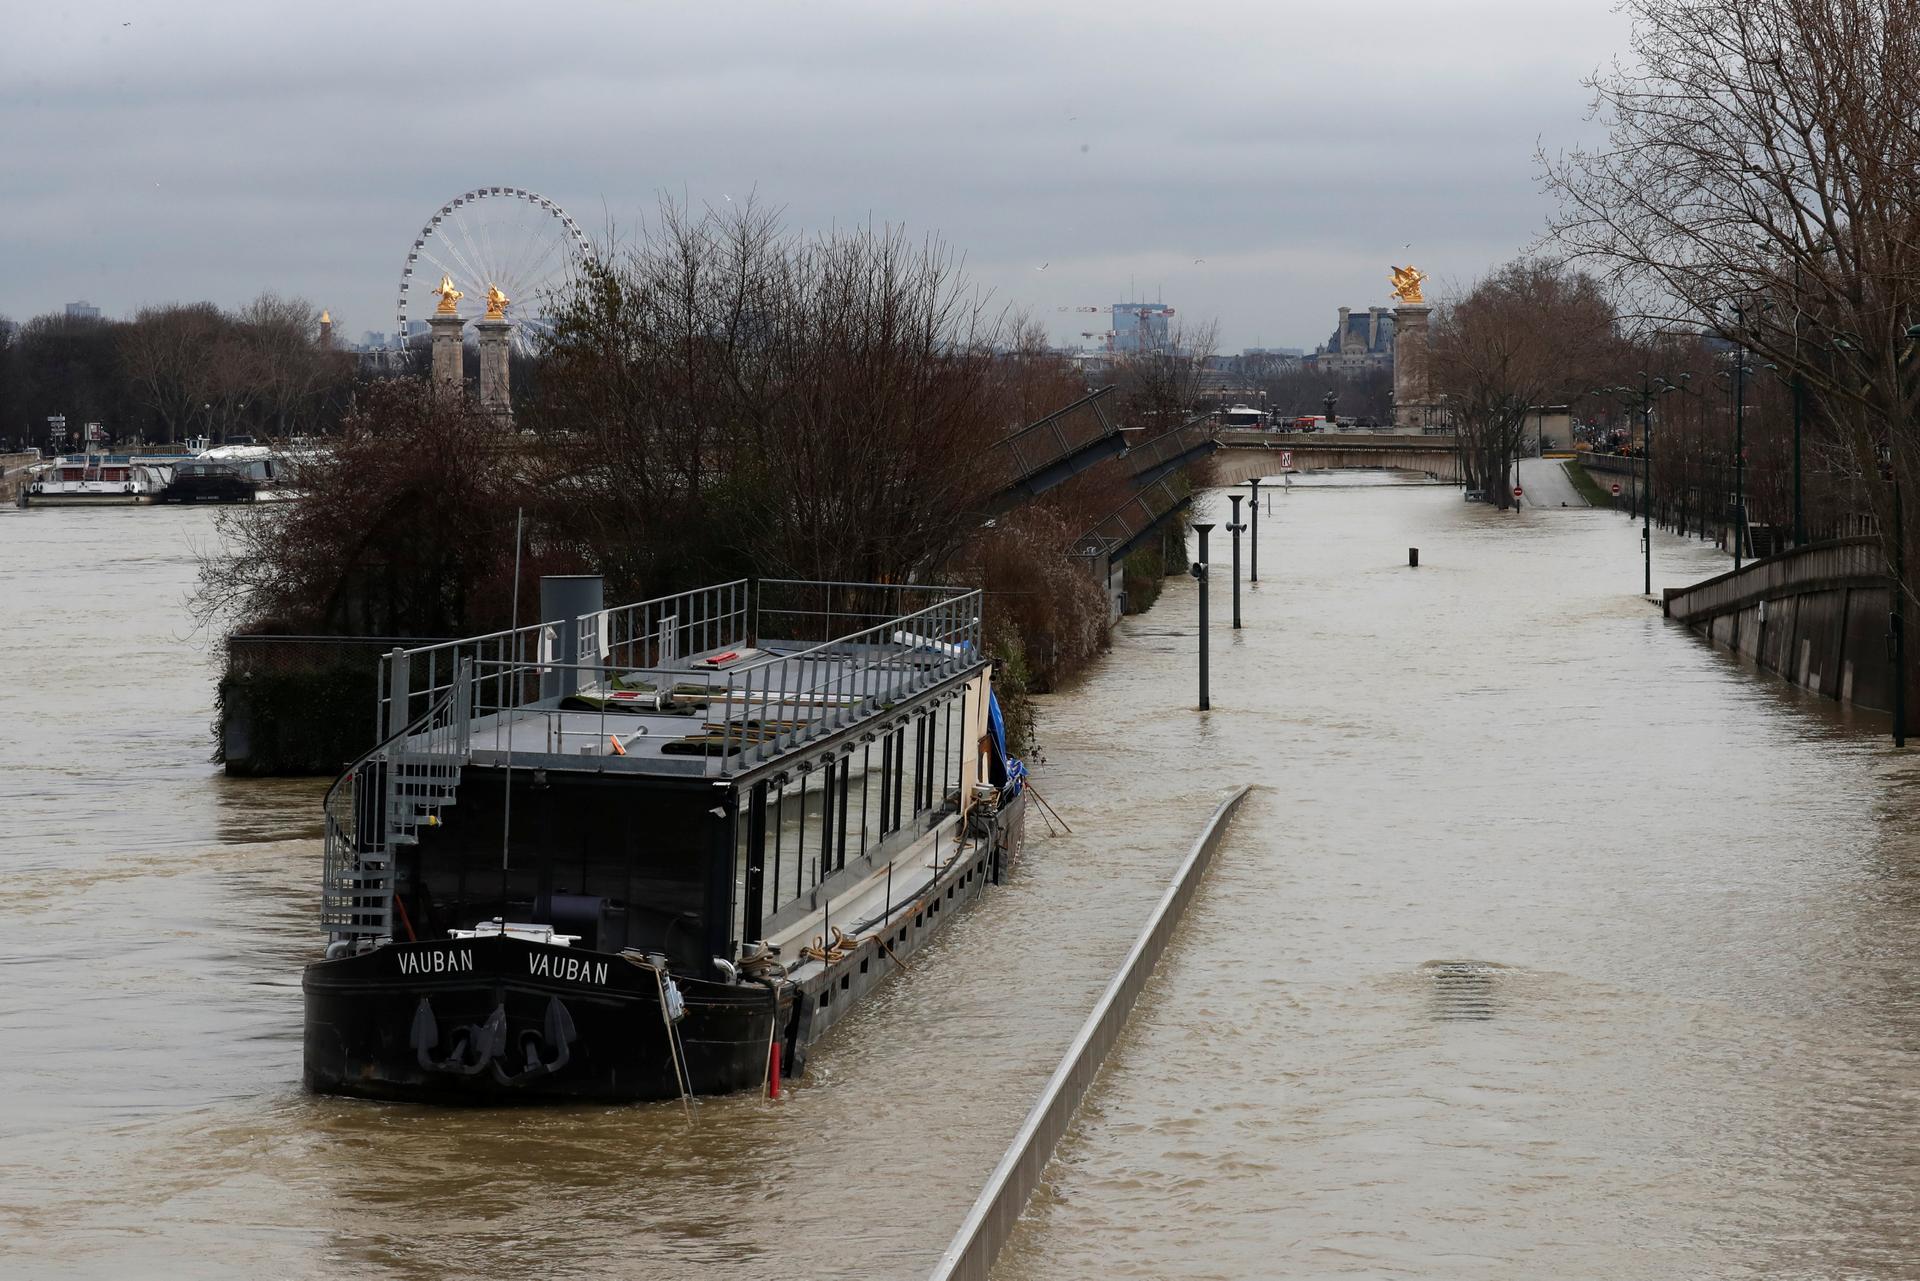 A view shows a peniche boat moored along the flooded banks of the River Seine after days of almost non-stop rain caused flooding in the country in Paris, France.